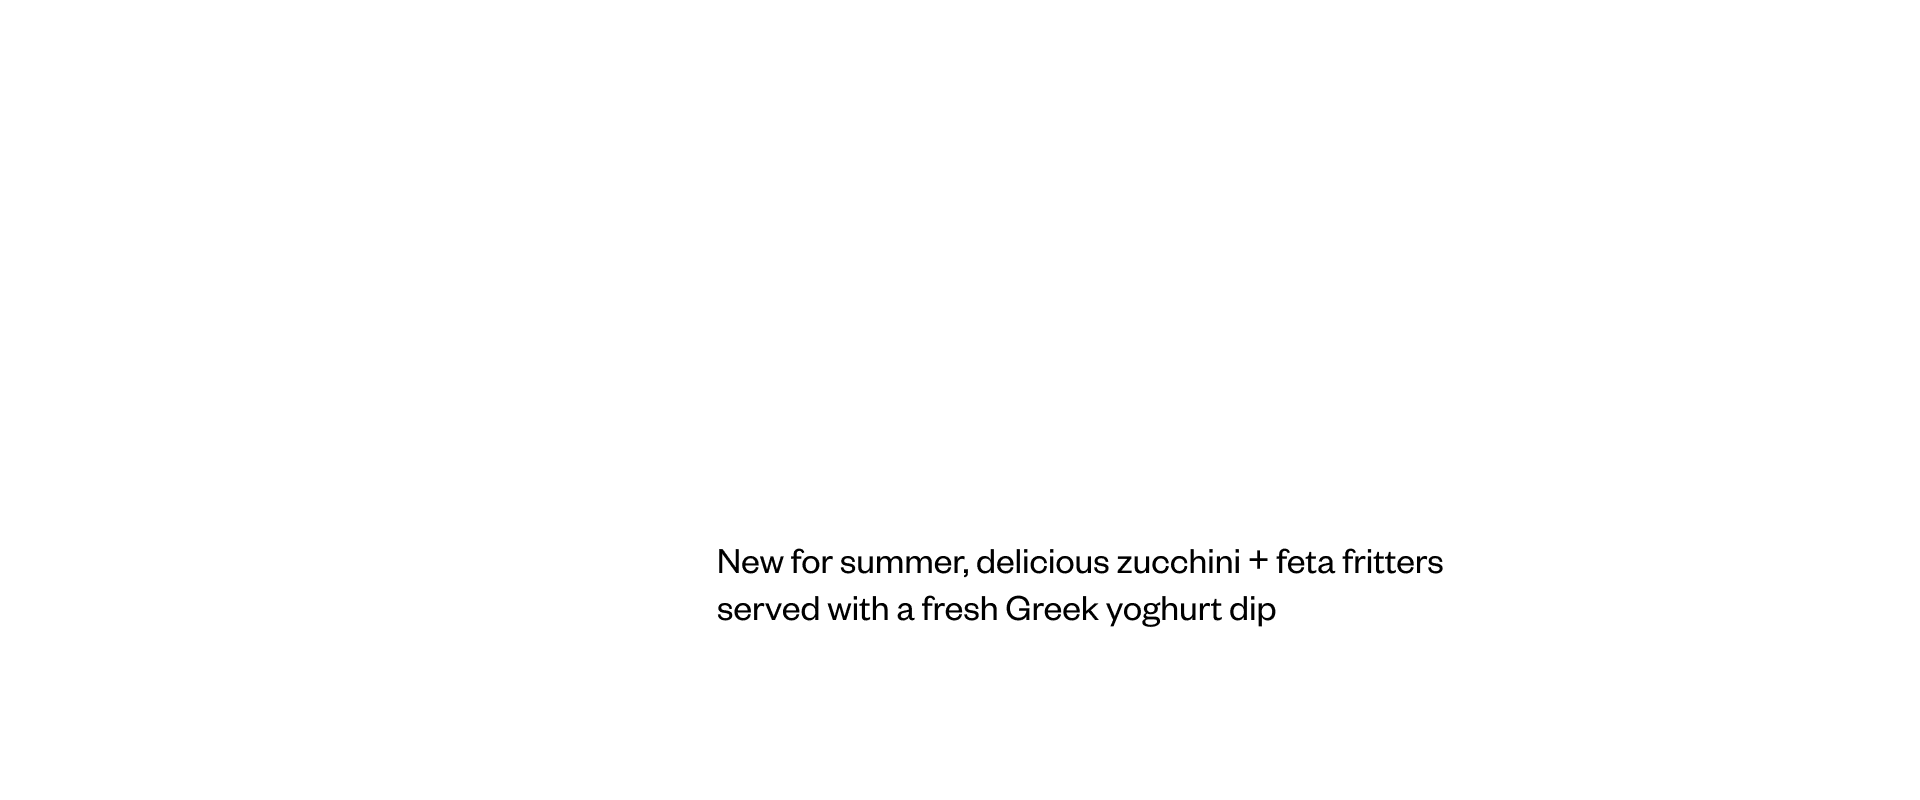 FOR A LIMITED TIME! Zucchini fritters